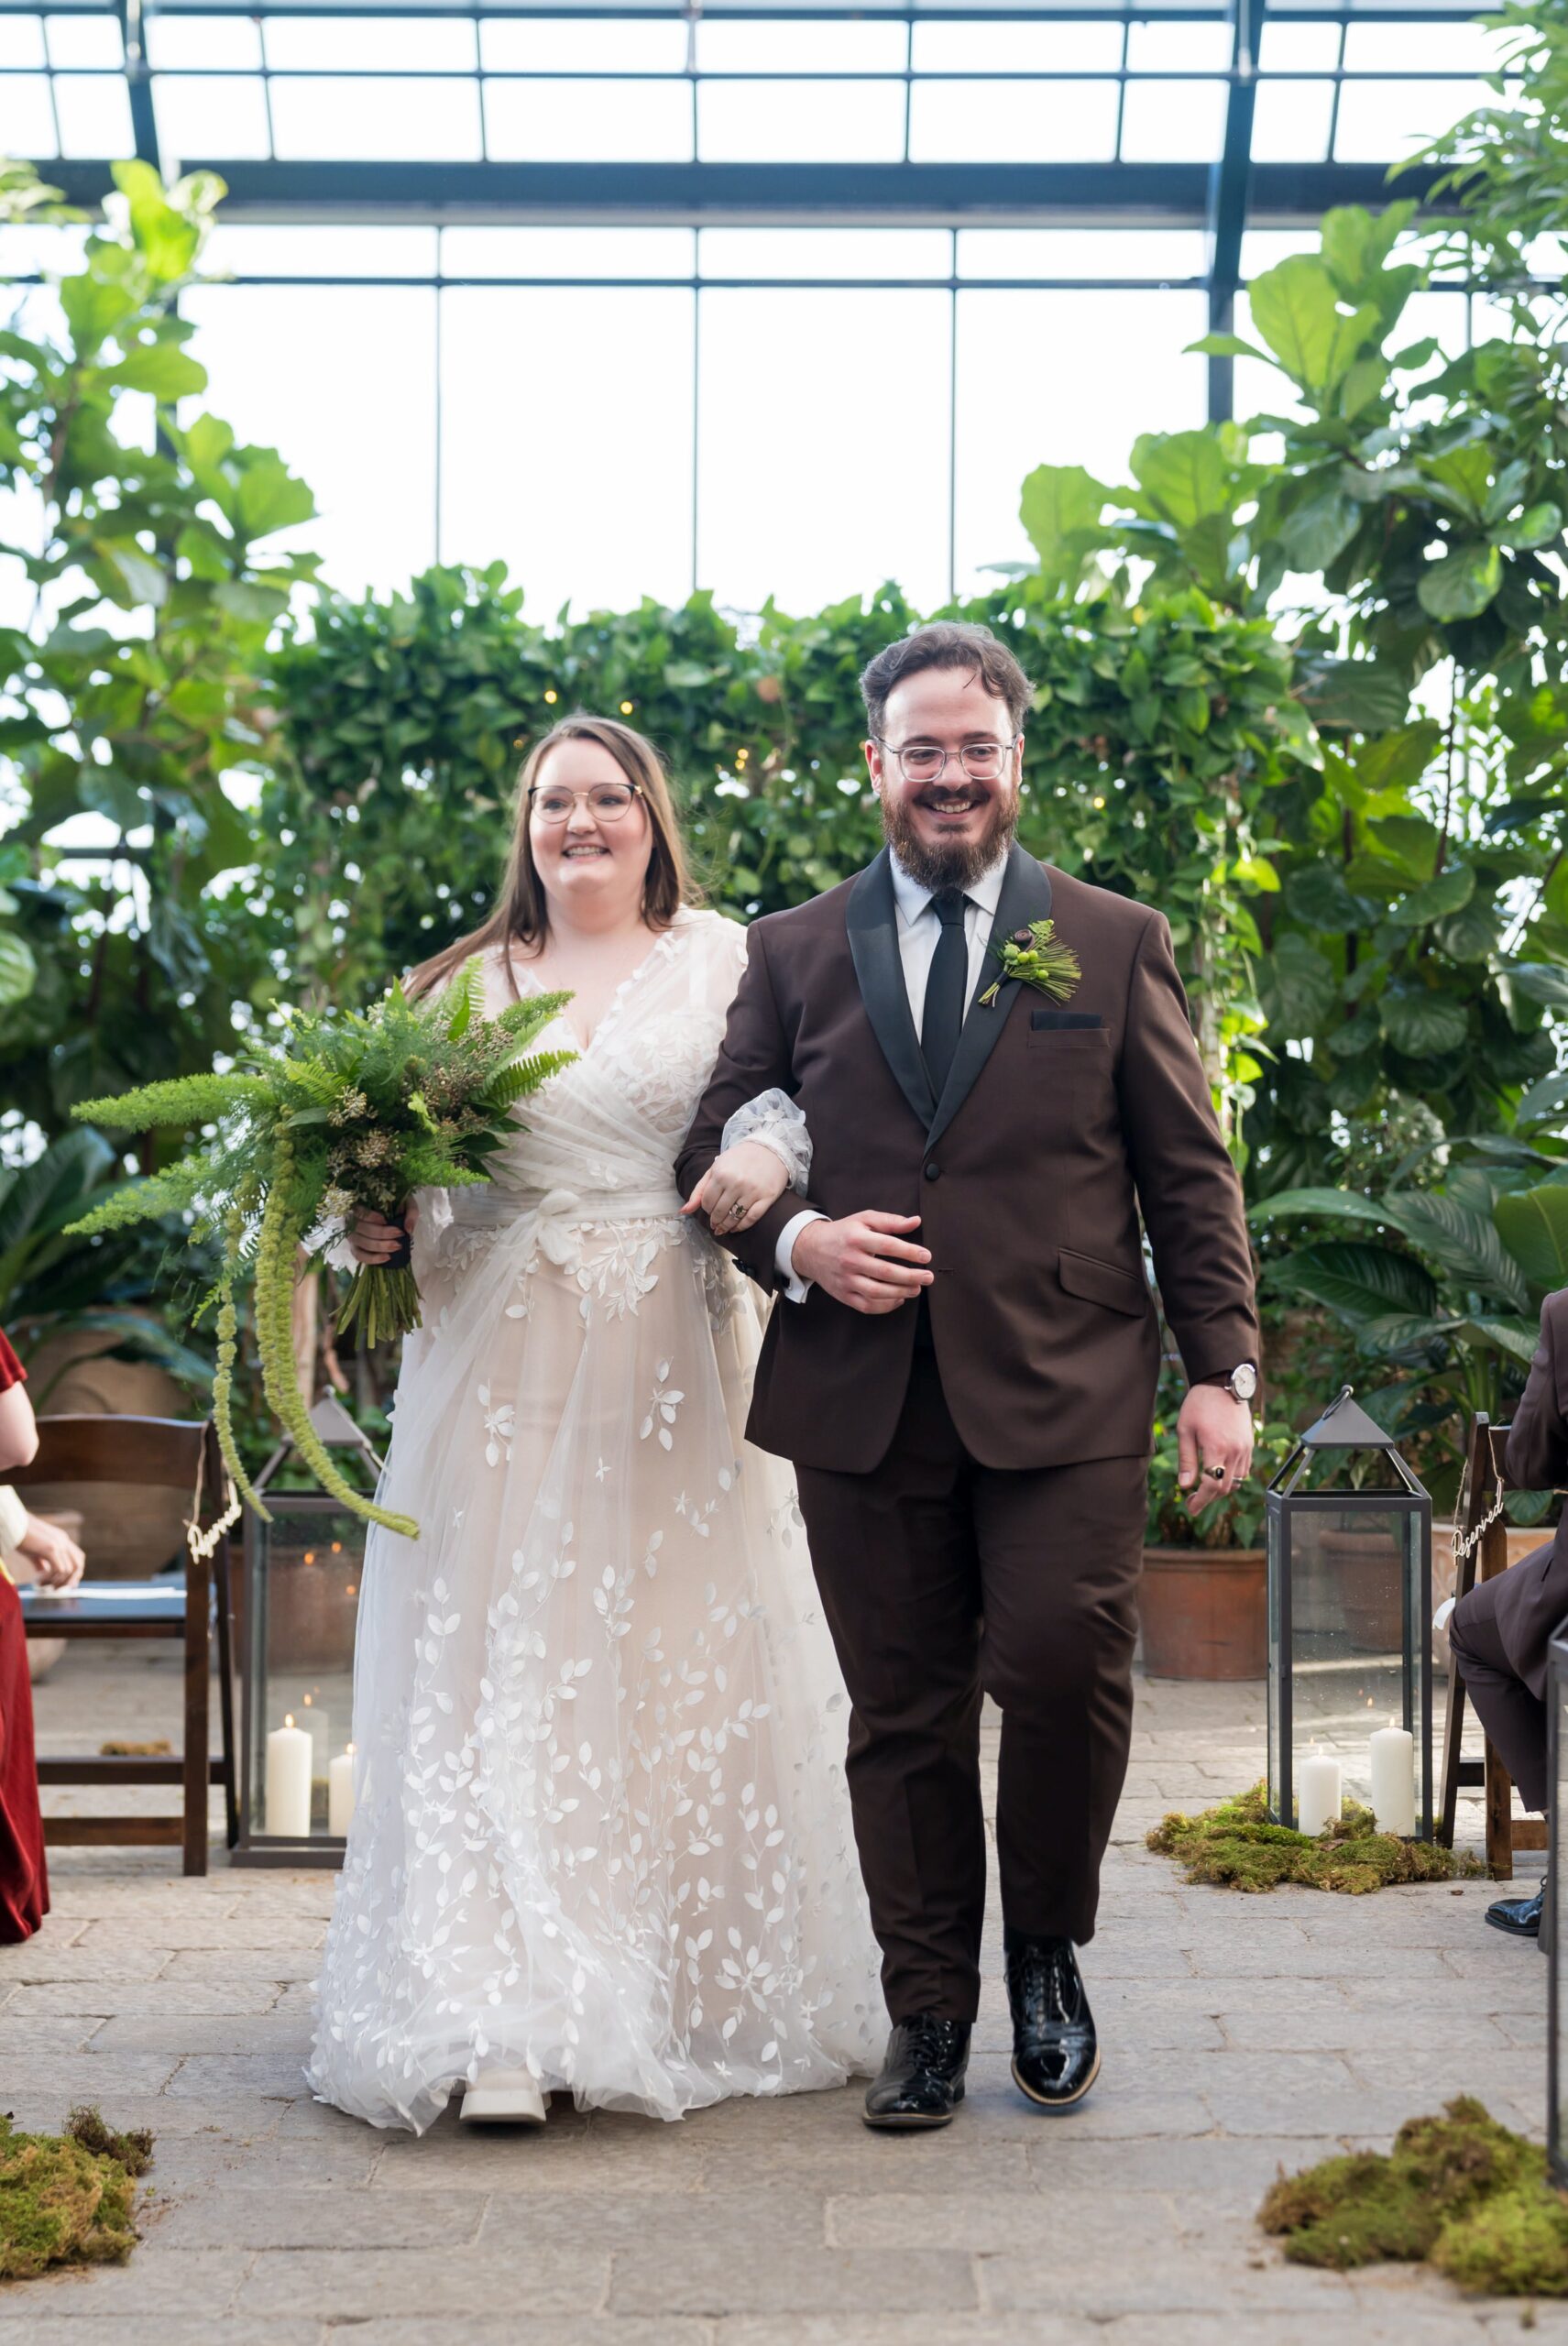 A bride and groom walk down the aisle during their Planterra wedding ceremony.   